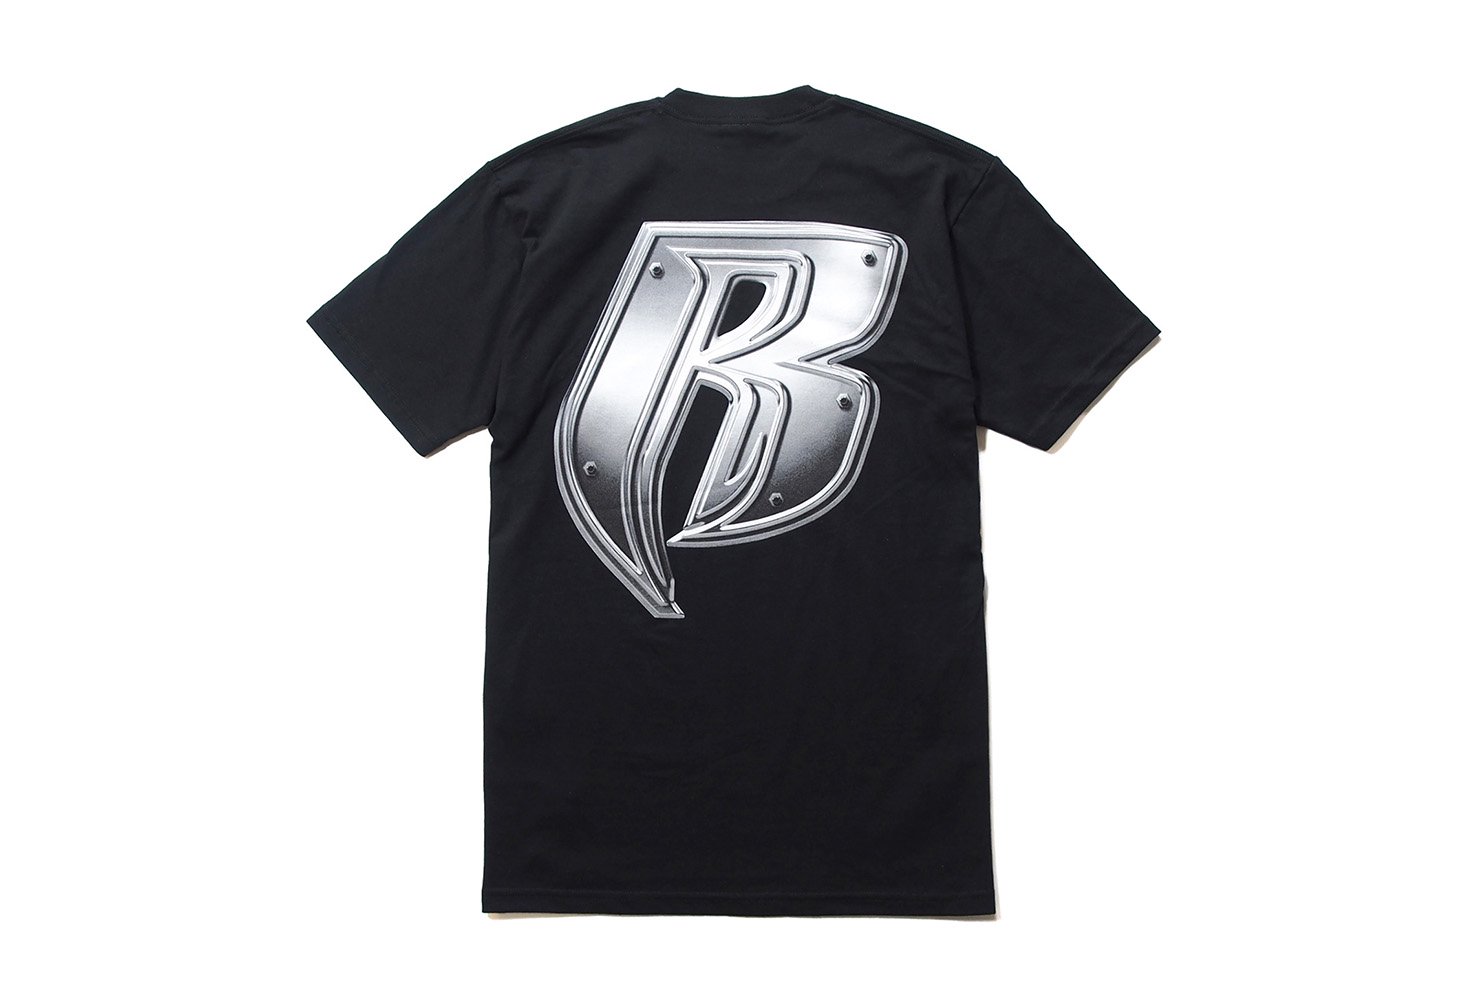 Supreme/Ruff Ryders - Ruff Ryders Tee - ParkSIDER